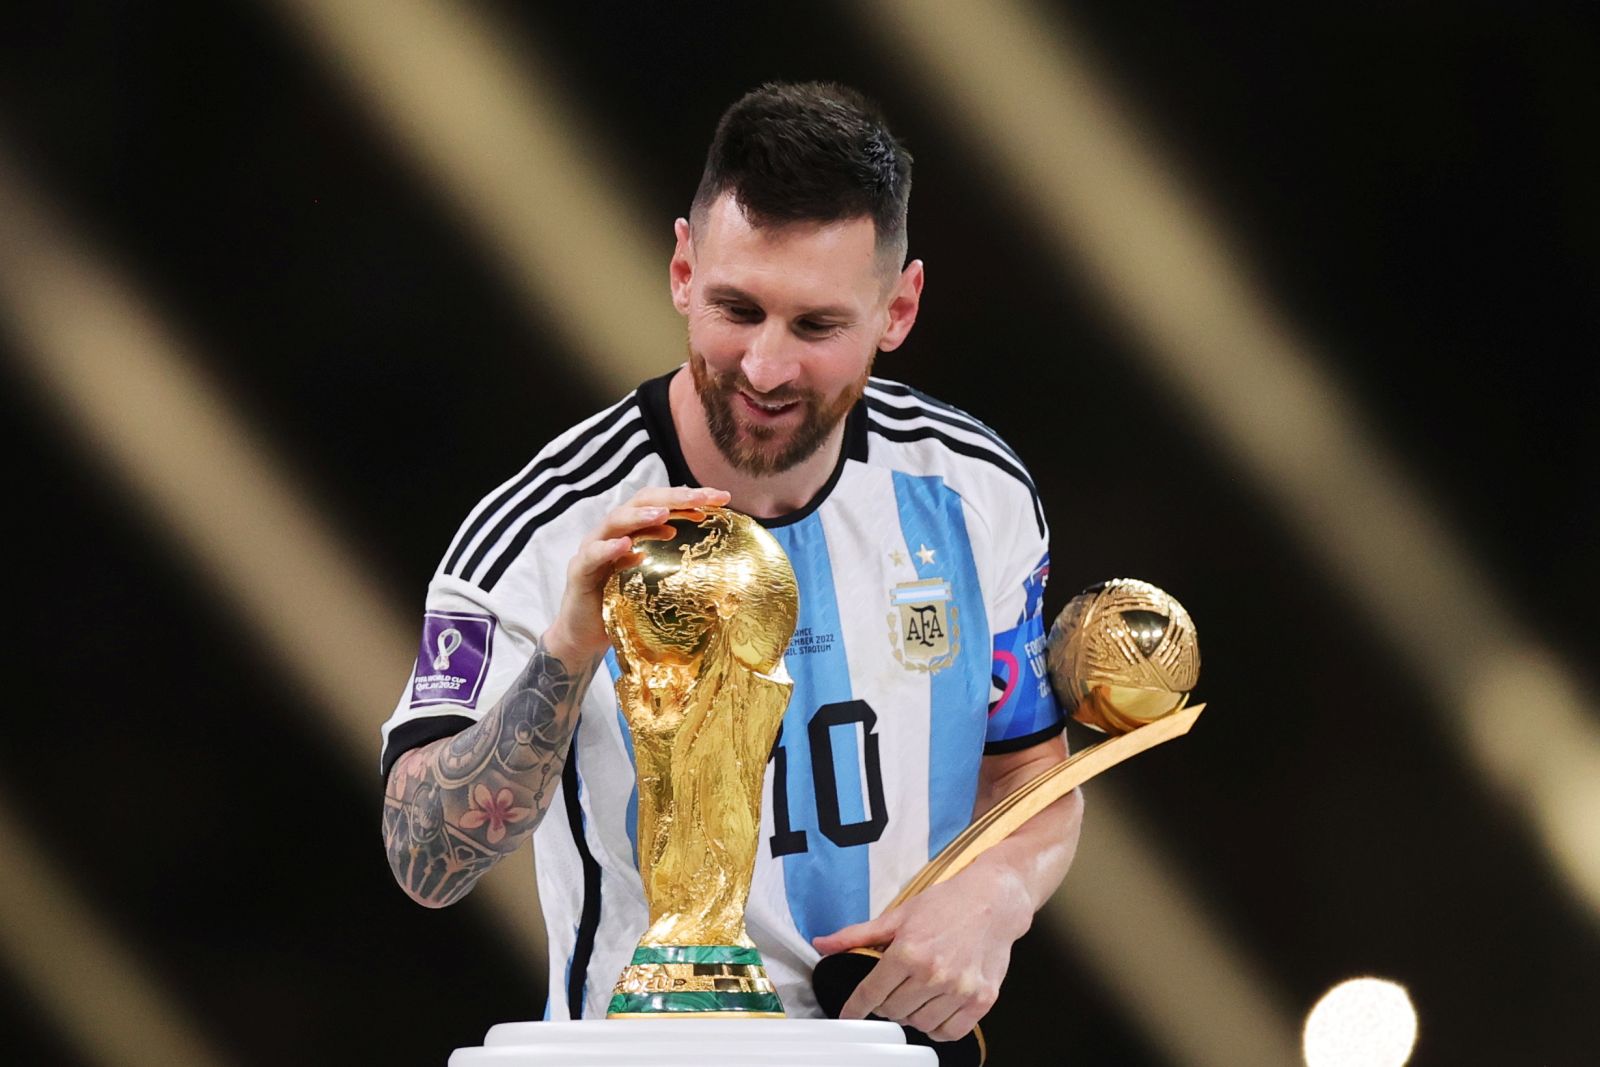 epa10373265 Lionel Messi of Argentina touches the World Cup trophy as he passes it after winning the golden ball award during the awards ceremony after the FIFA World Cup 2022 Final between Argentina and France at Lusail stadium, Lusail, Qatar, 18 December 2022.  EPA/Friedemann Vogel